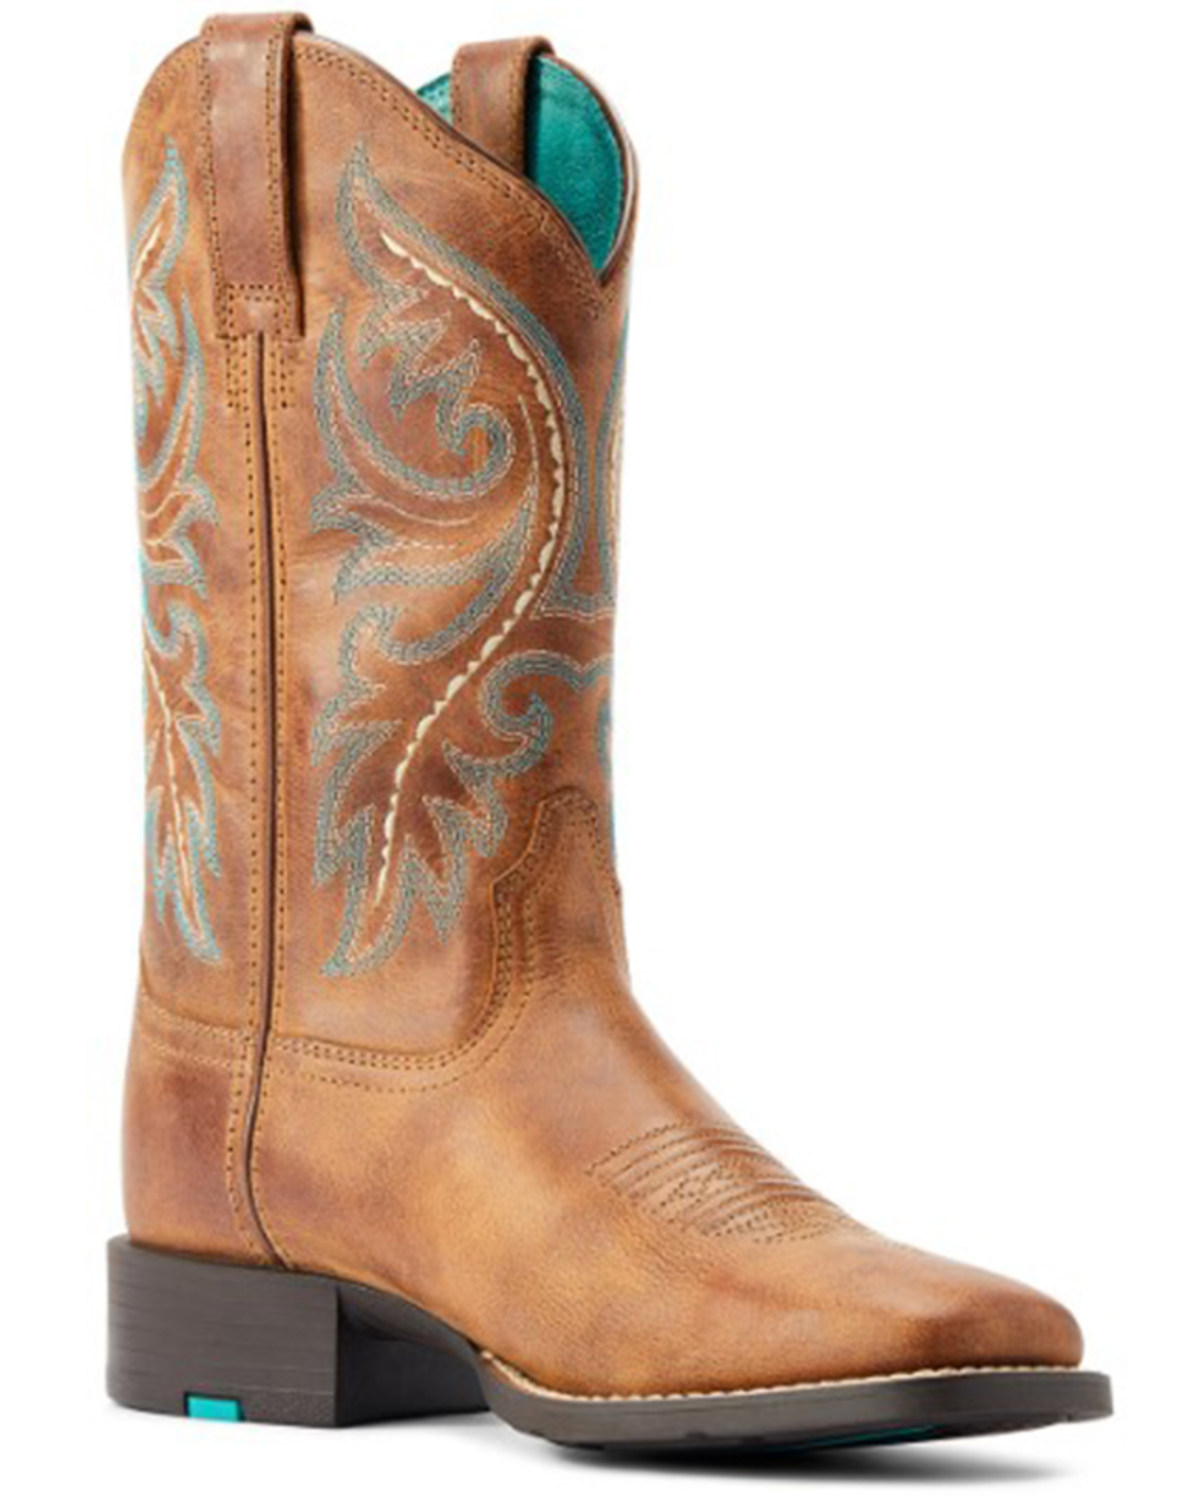 Ariat Women's Round Up Back Zip Western Boots - Broad Square Toe